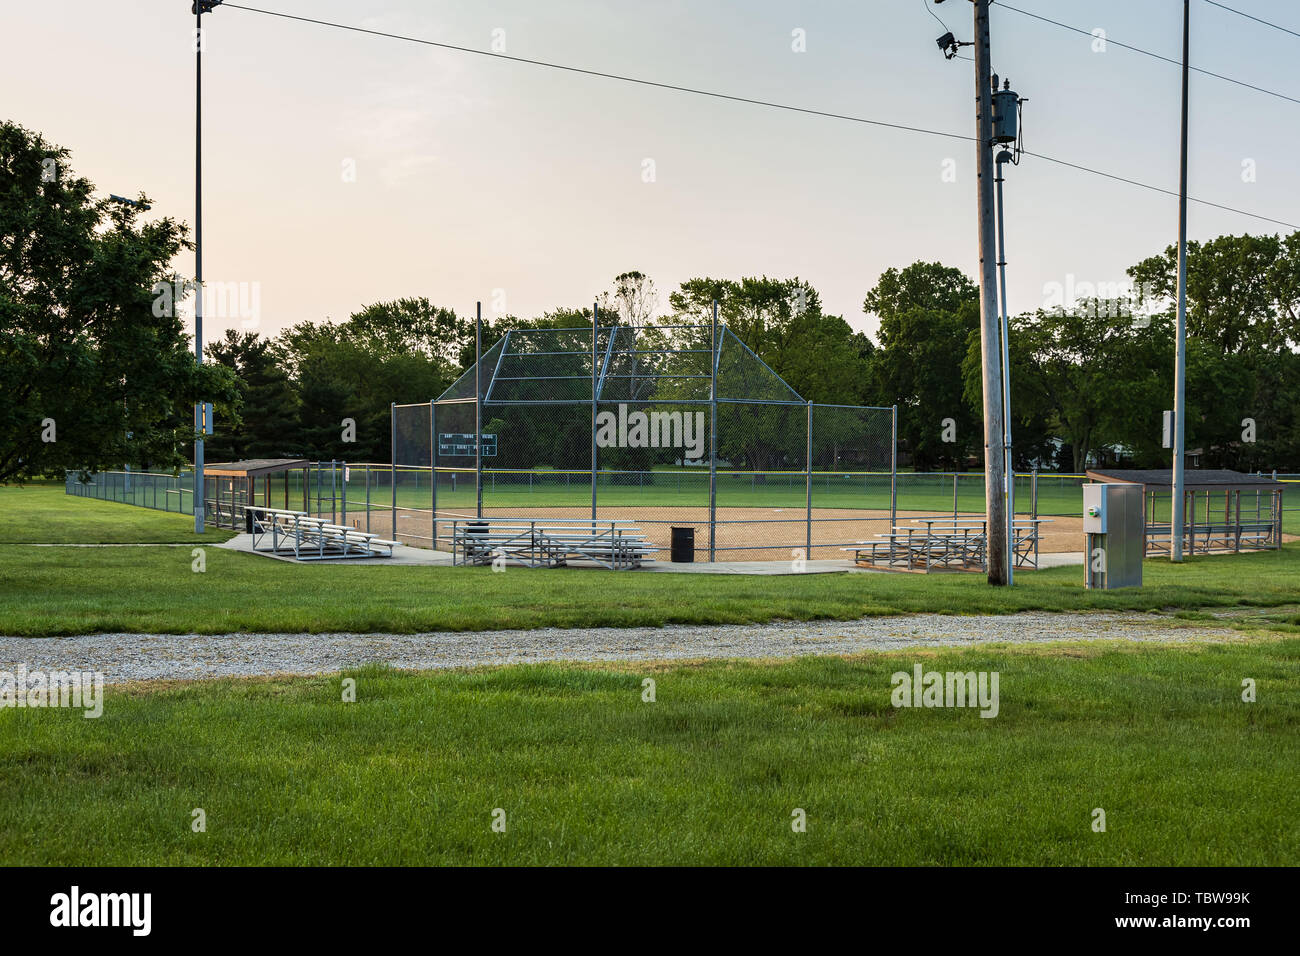 a softball field at dawn waiting the days games Stock Photo